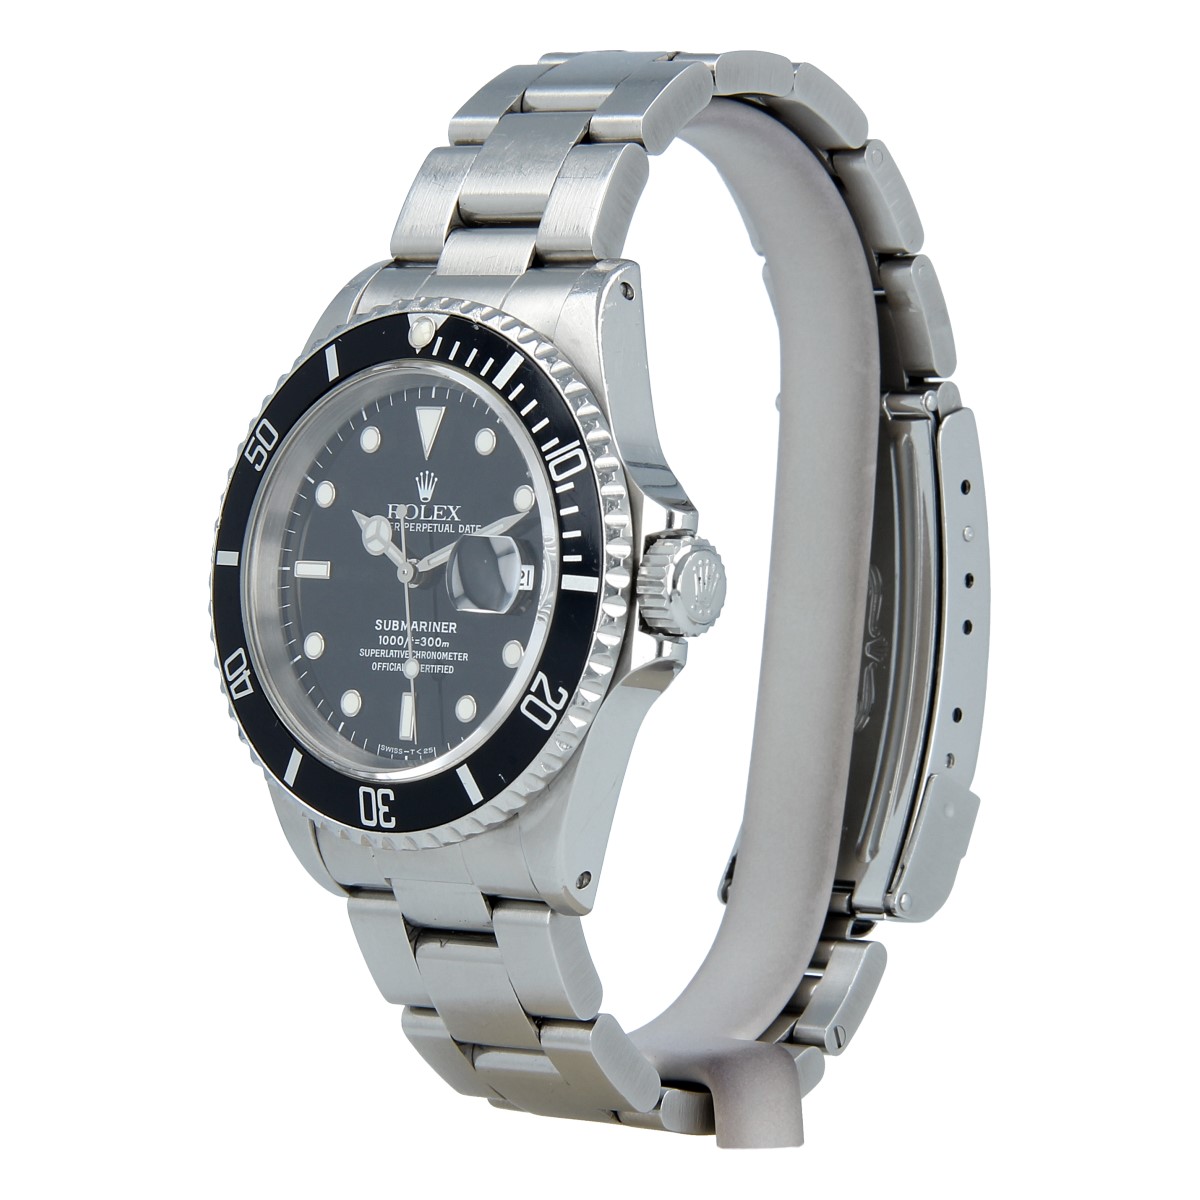 Rolex Submariner Date 16610 Never Polished | Buy pre-owned Rolex watch